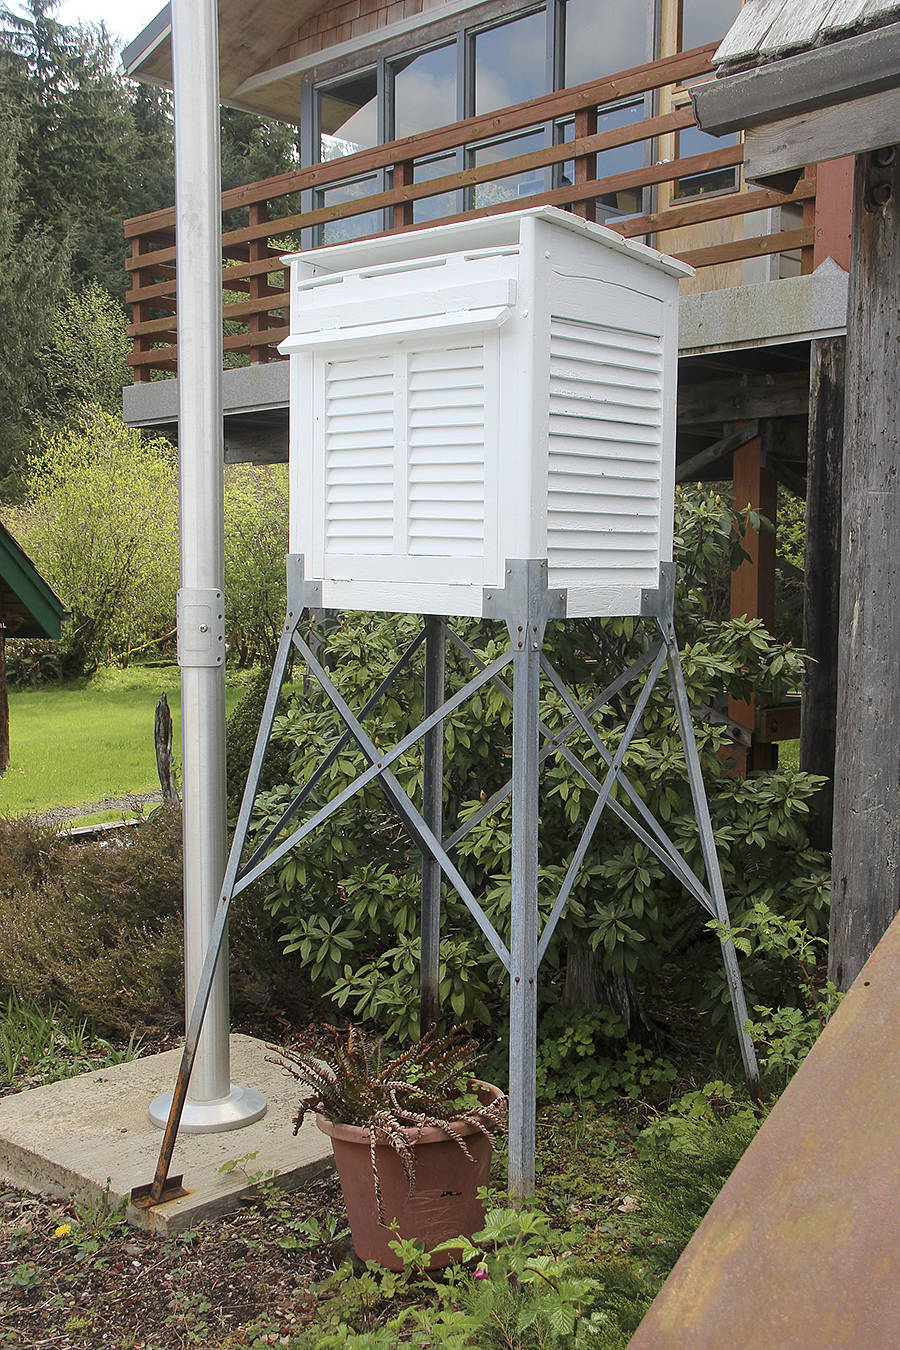 Weather Station donated to Forks Timber Museum